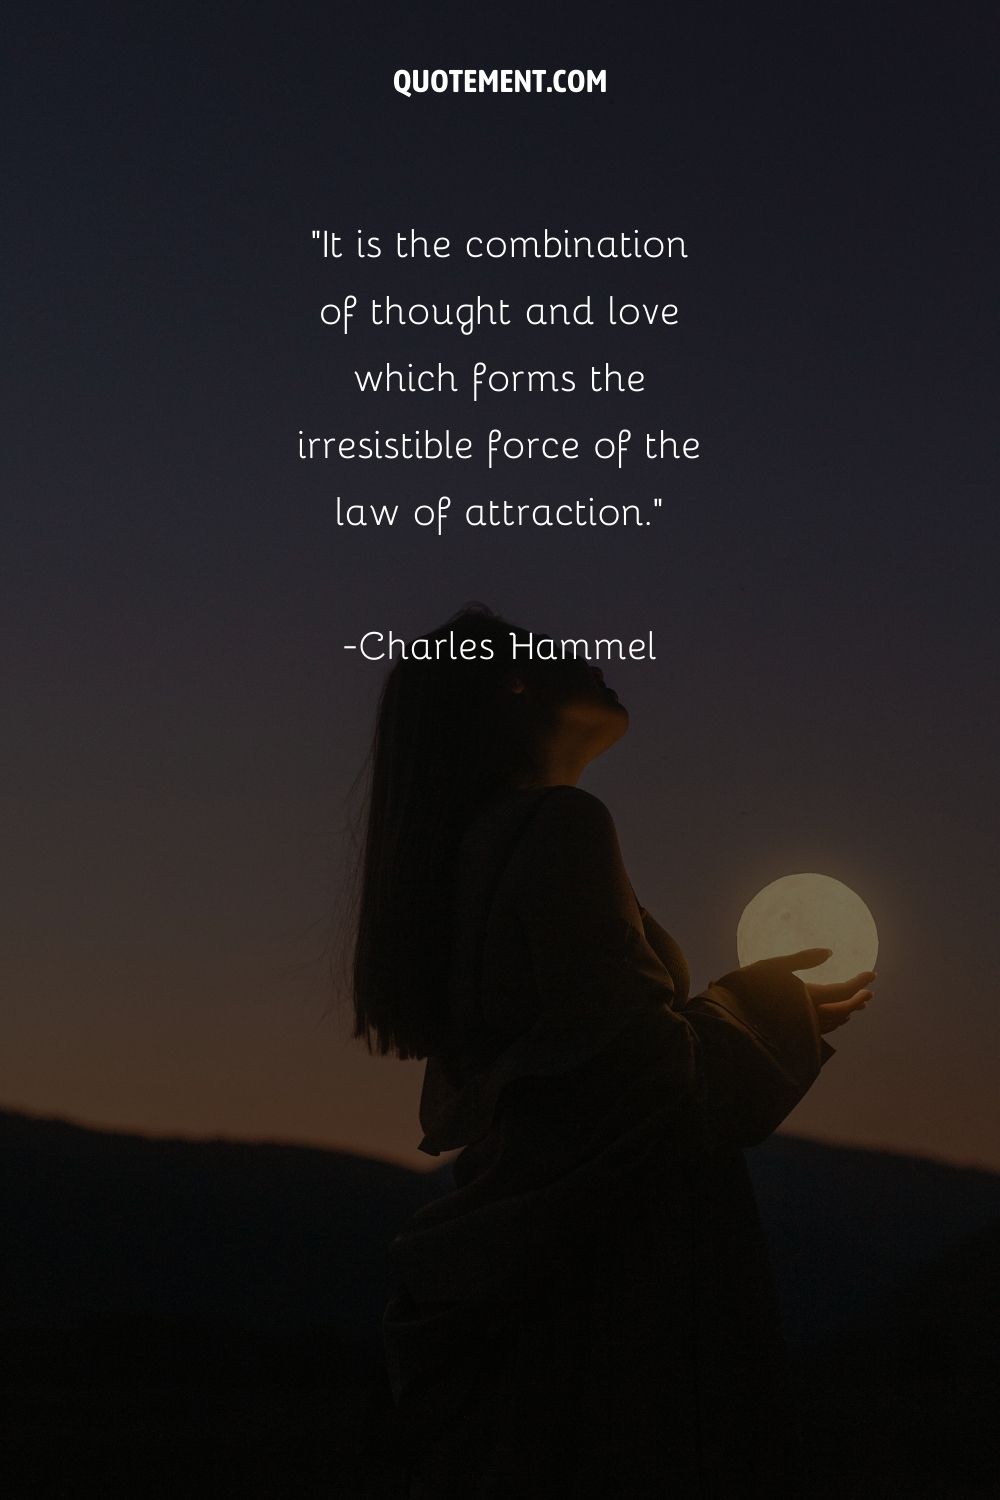 a woman holding the moon in her hands representing laws of attraction quote on thoughts